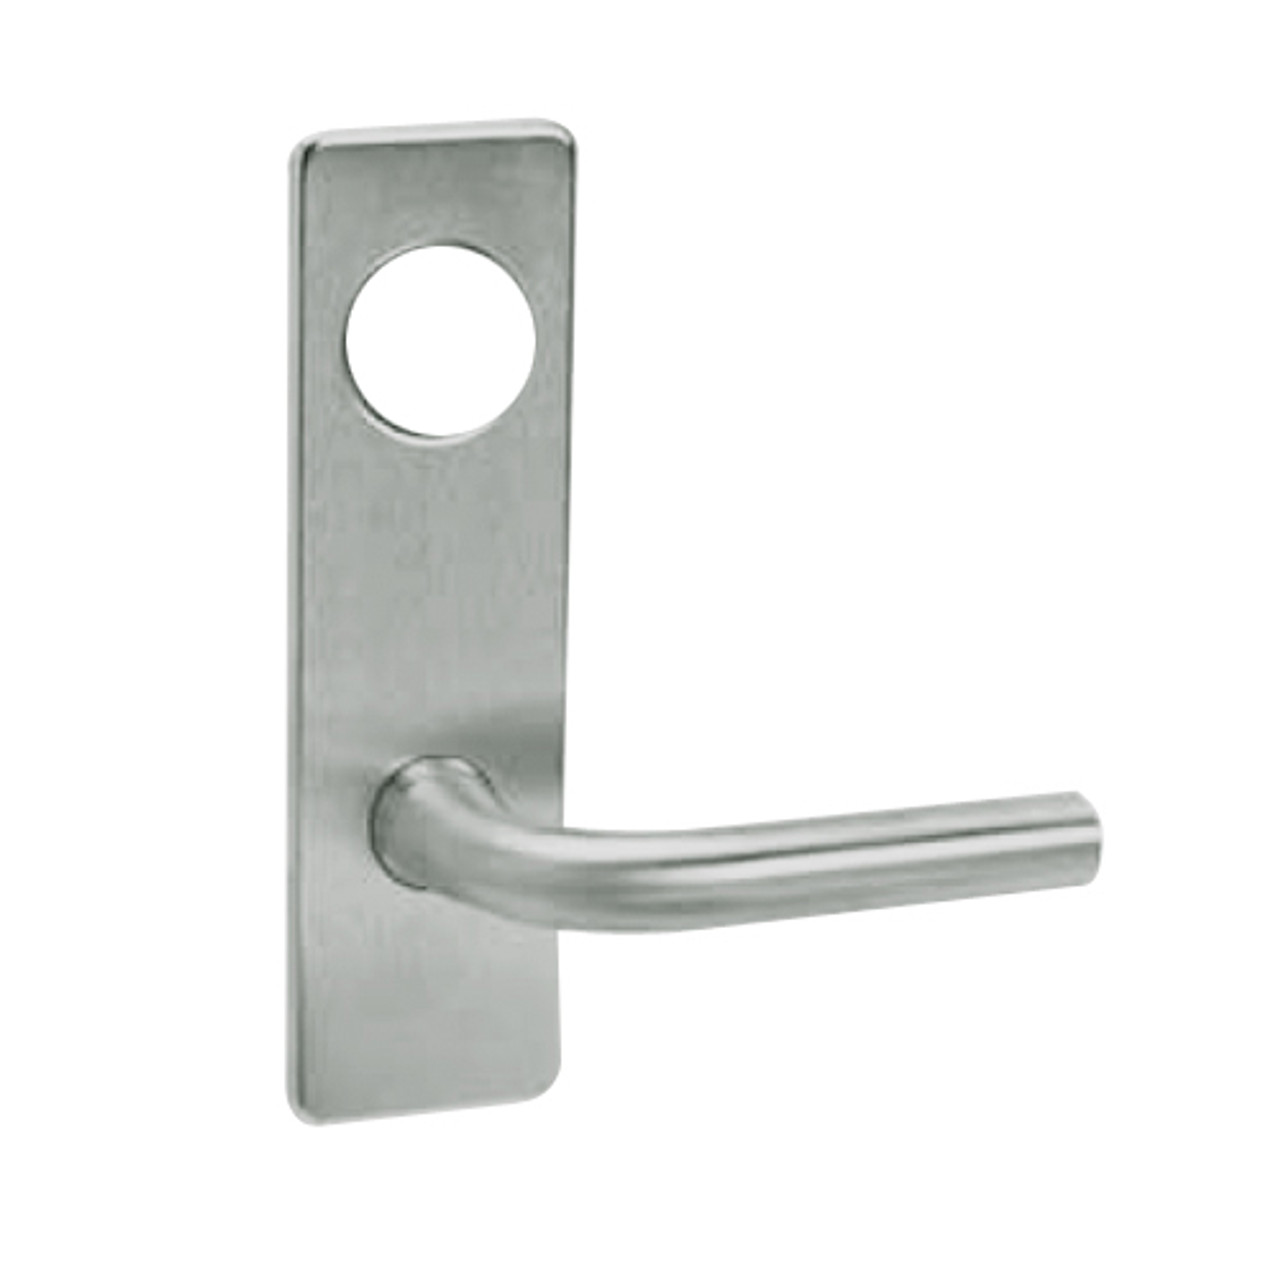 ML2042-RSR-619-CL7 Corbin Russwin ML2000 Series IC 7-Pin Less Core Mortise Entrance Locksets with Regis Lever in Satin Nickel